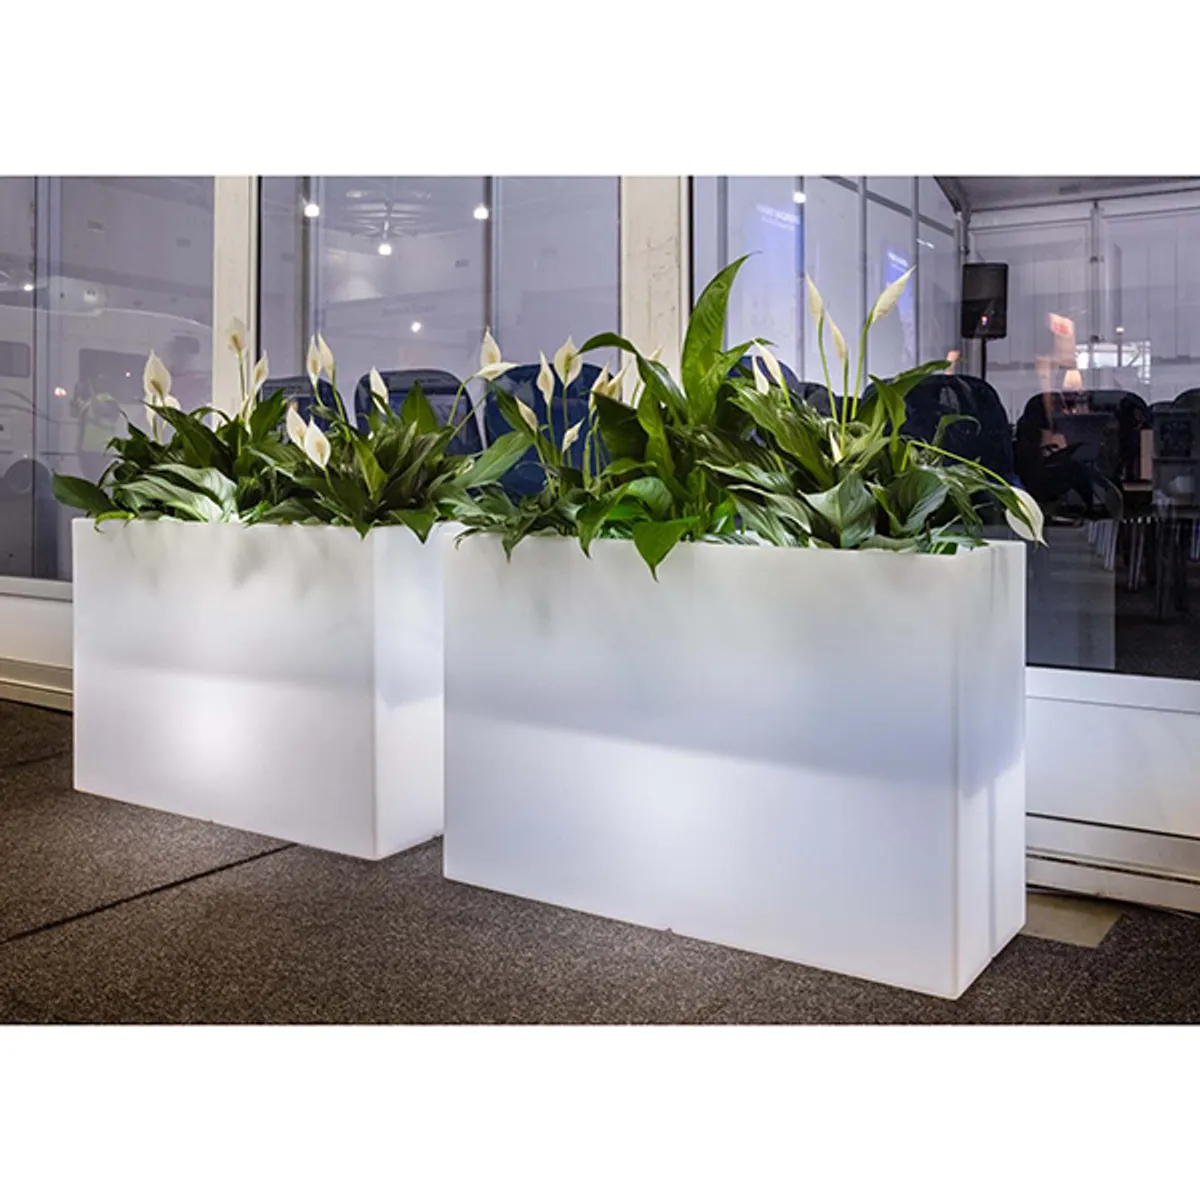 Kado Planter Tall Illuminated Inside Out Contracts